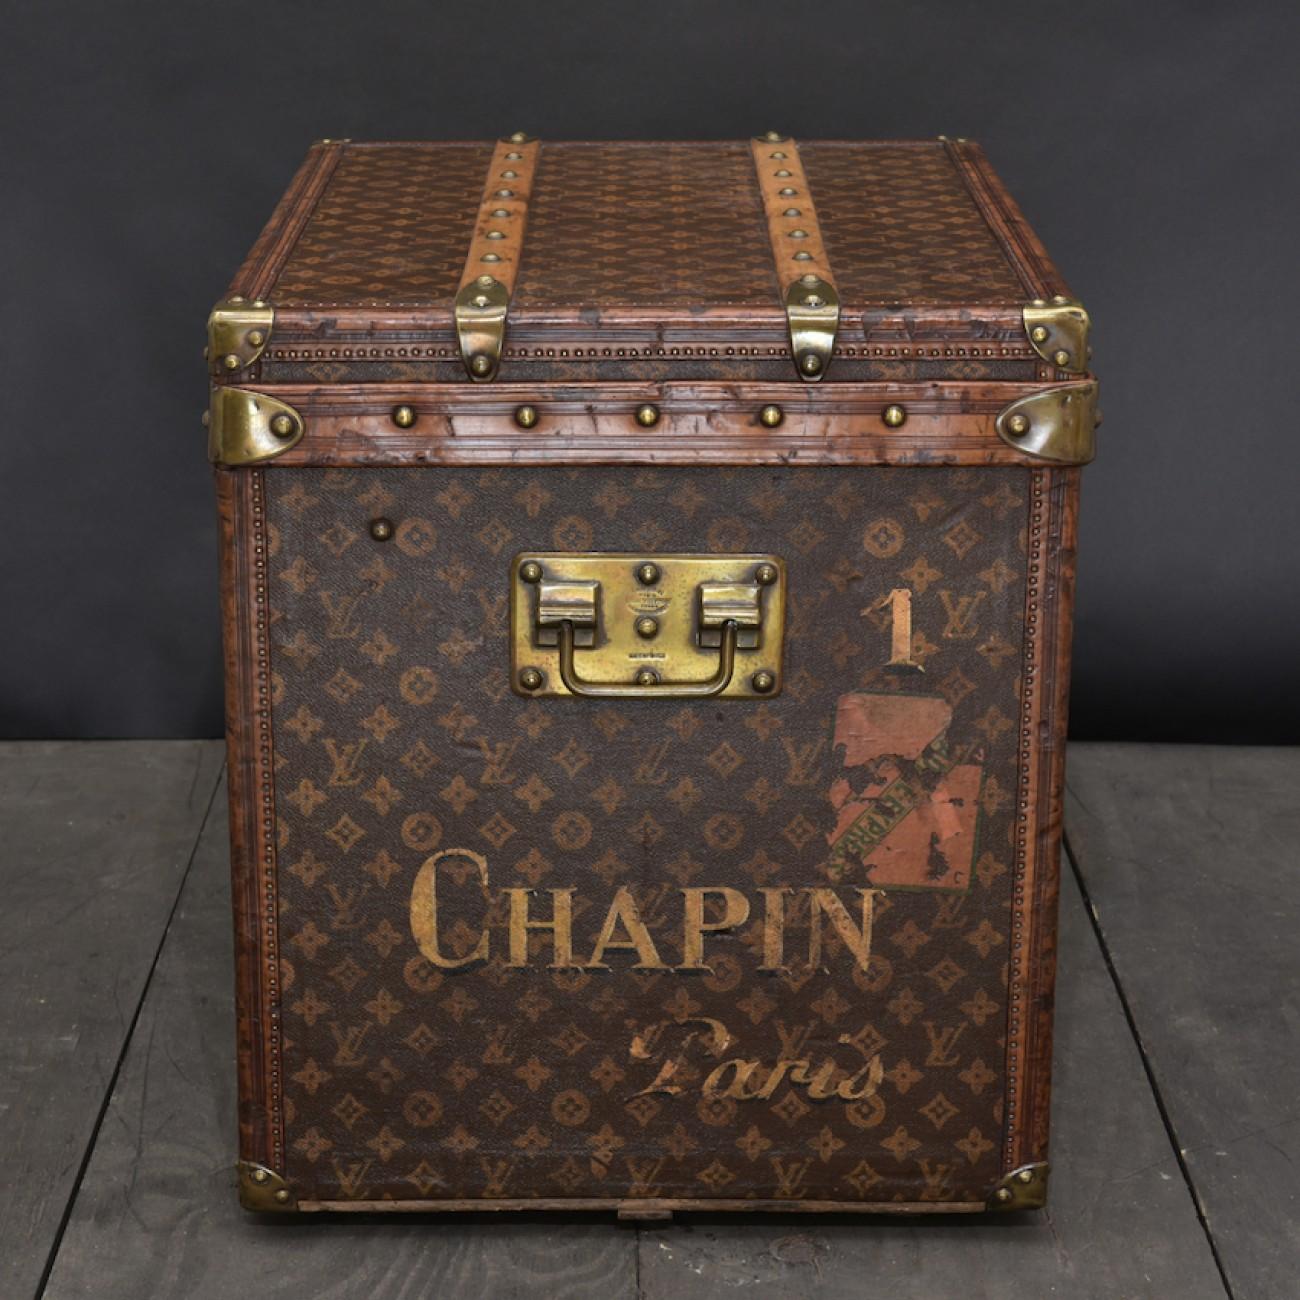 A stunning Louis Vuitton hat cube with LV monogram canvas, leather trim, brass handles, original lining and tray, circa 1905.

Dimensions: 61 cm/24 inches (length) x 46 cm/18? inches (width) x 54 cm/ 21¼ inches (height).

Bentleys are Members of